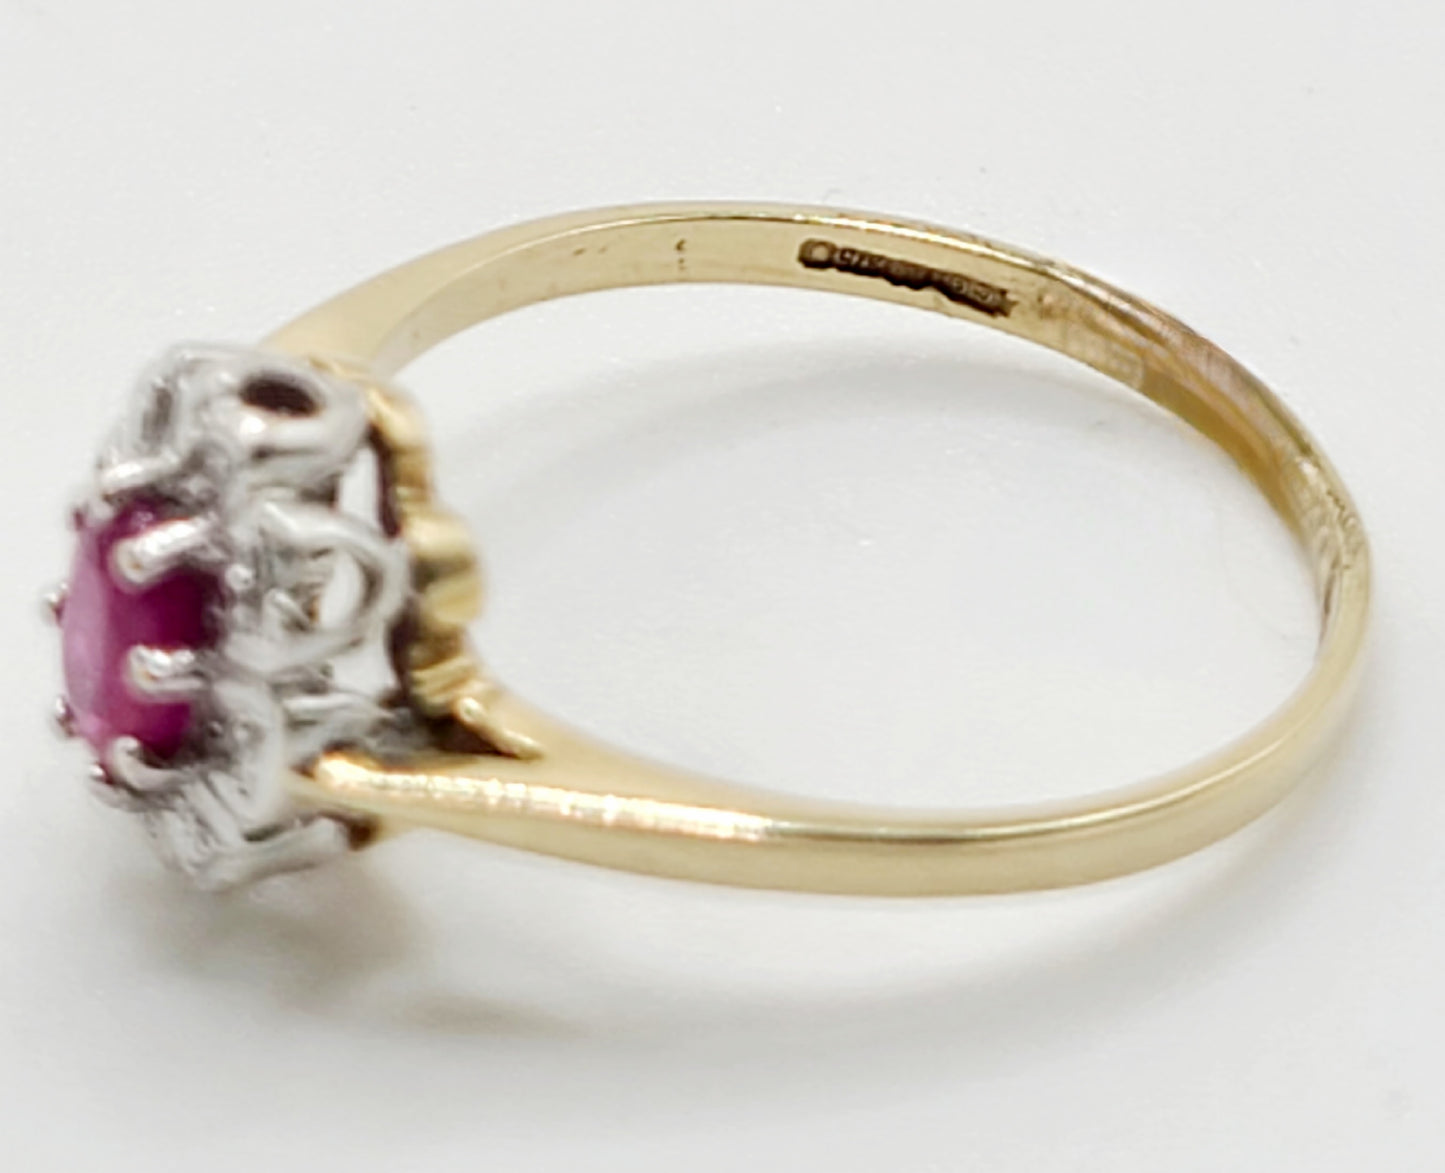 Vintage 1ct Ruby & Diamond Halo 9ct Gold Ring Size M